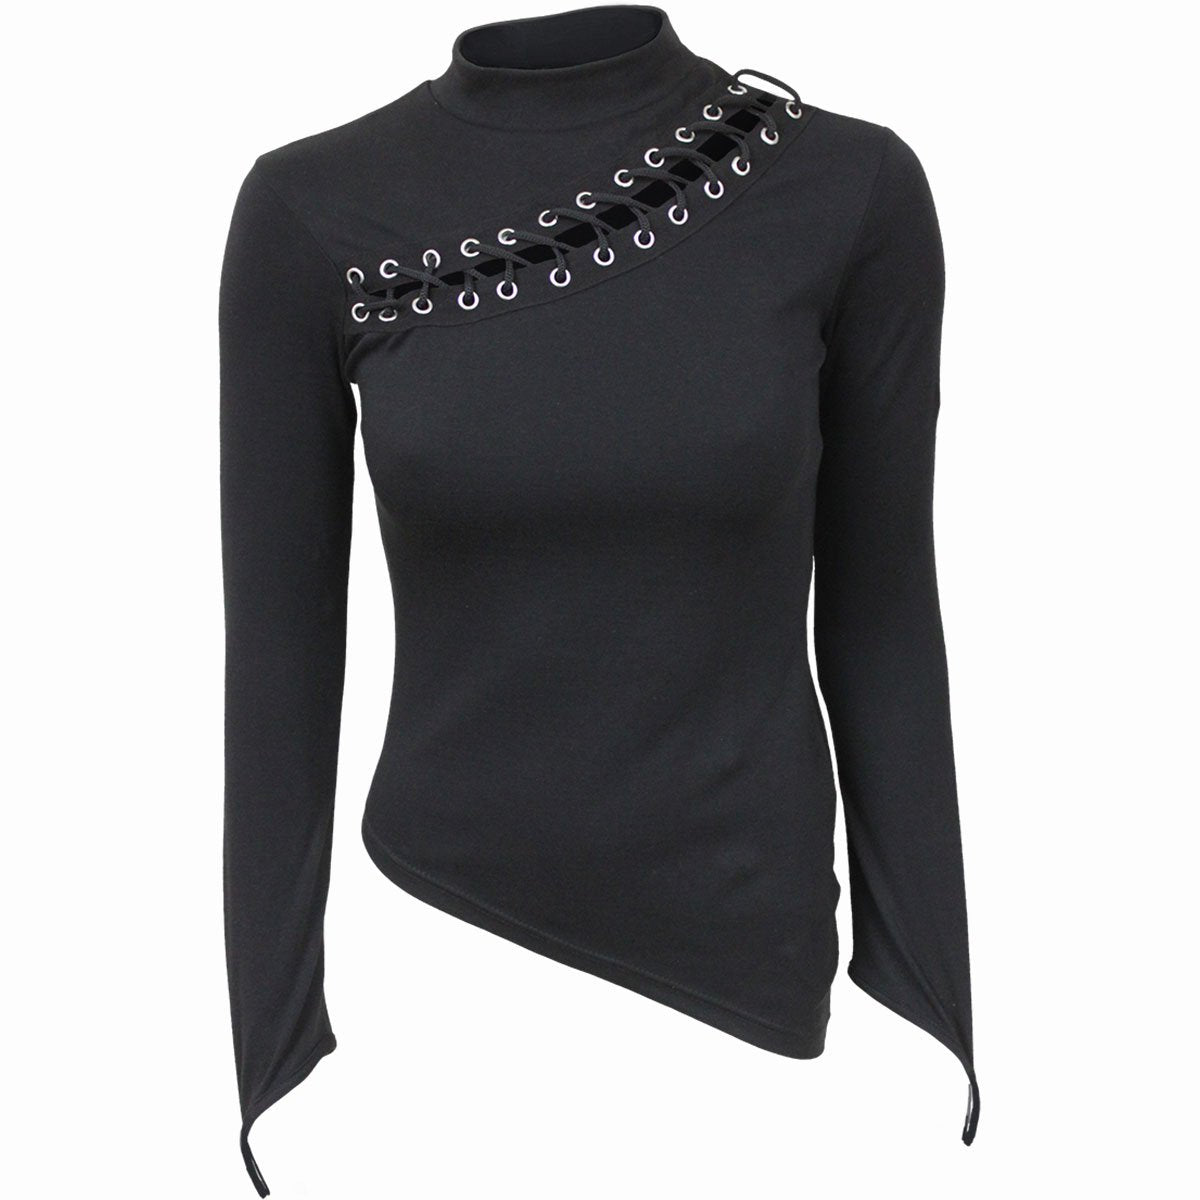 GOTHIC ROCK - Slant Lace Up Longsleeve Top - Spiral USA